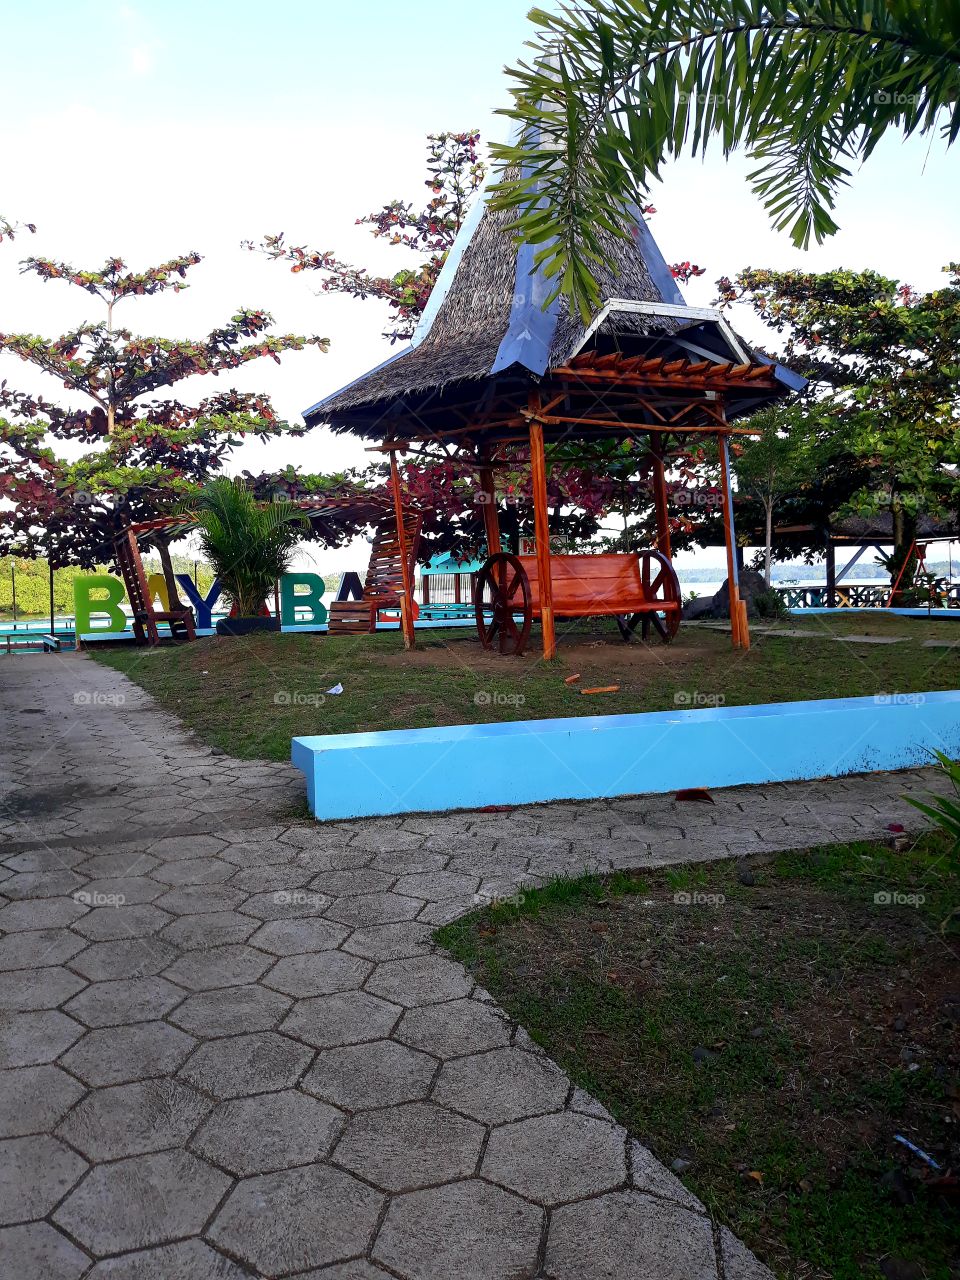 Enjoying a morning walk in this little baypark located in the tiny village of Bayabas, Surigao del Sur Philippines